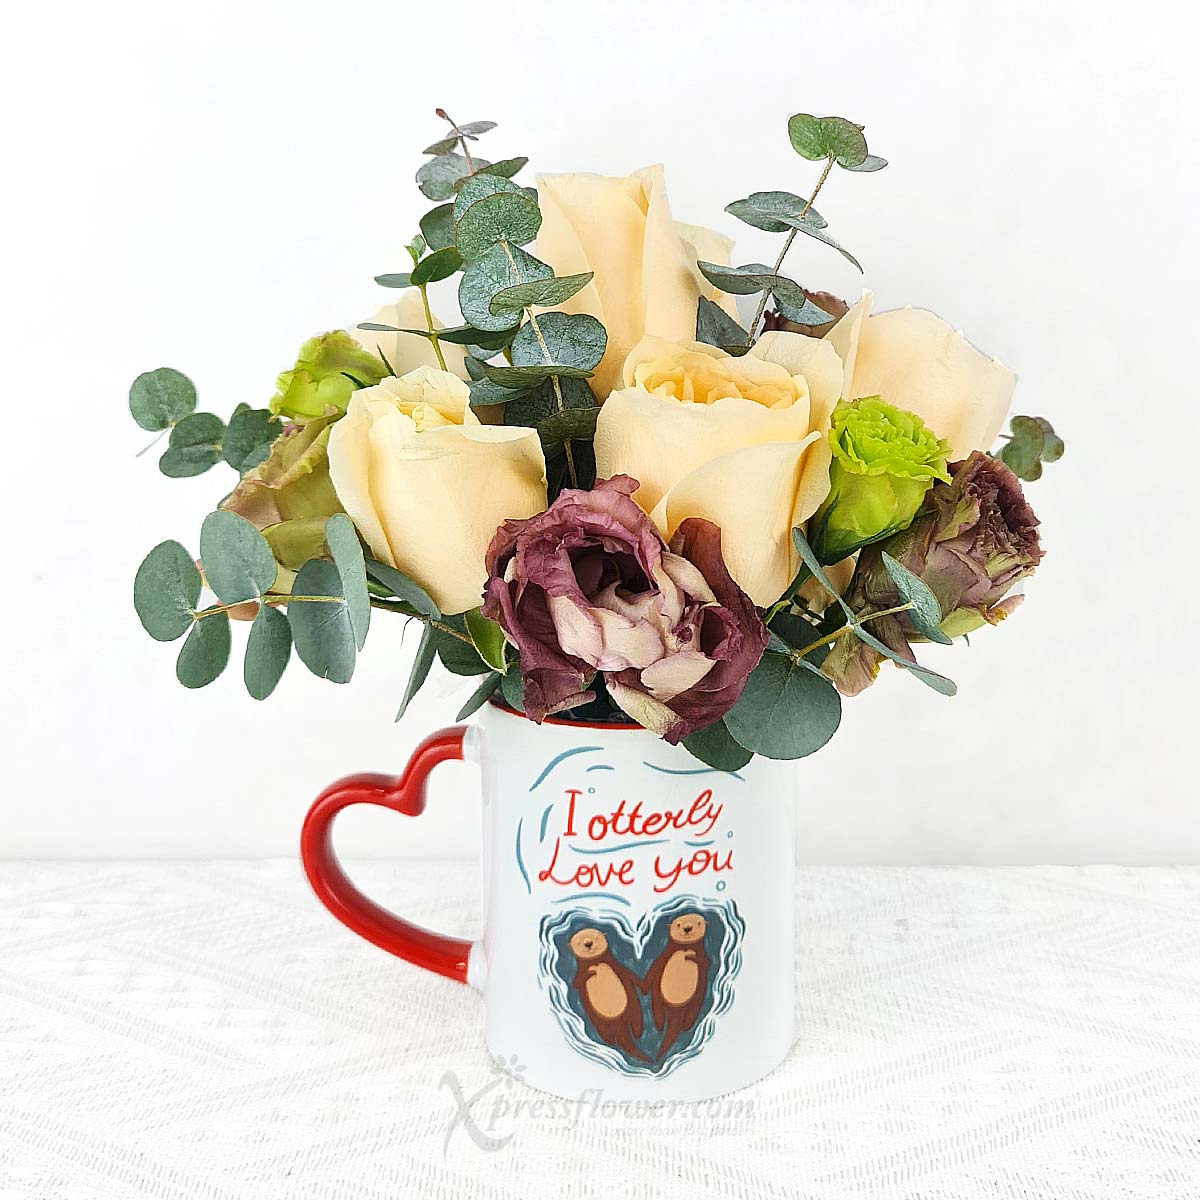 Otterly Bliss (6 Champagne Roses with "I Otterly Love You" Mug)